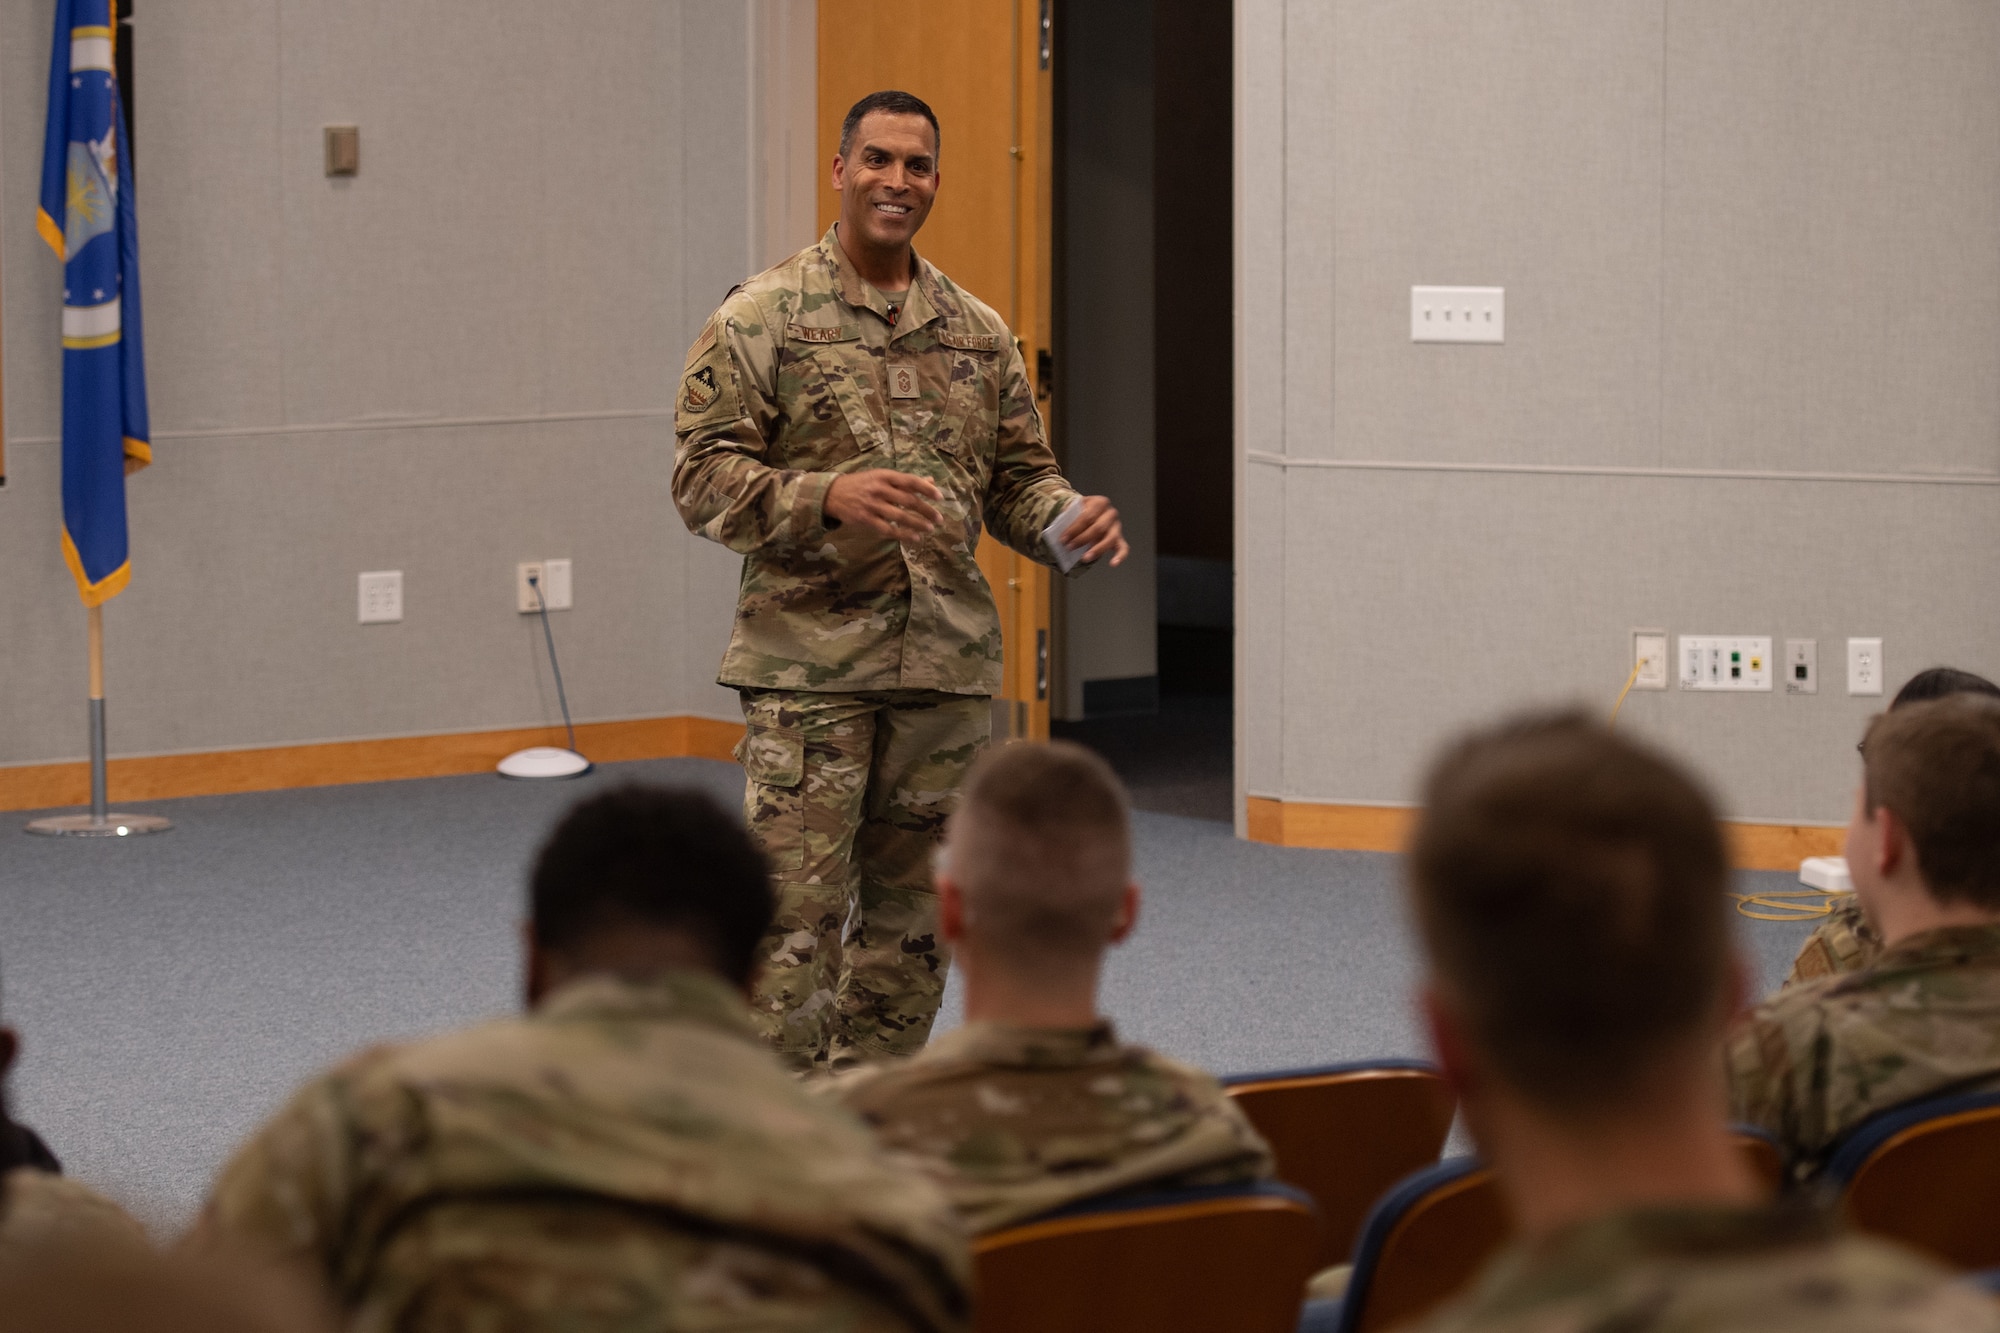 An enlisted chief stands in front of the room, smiling at attendees.